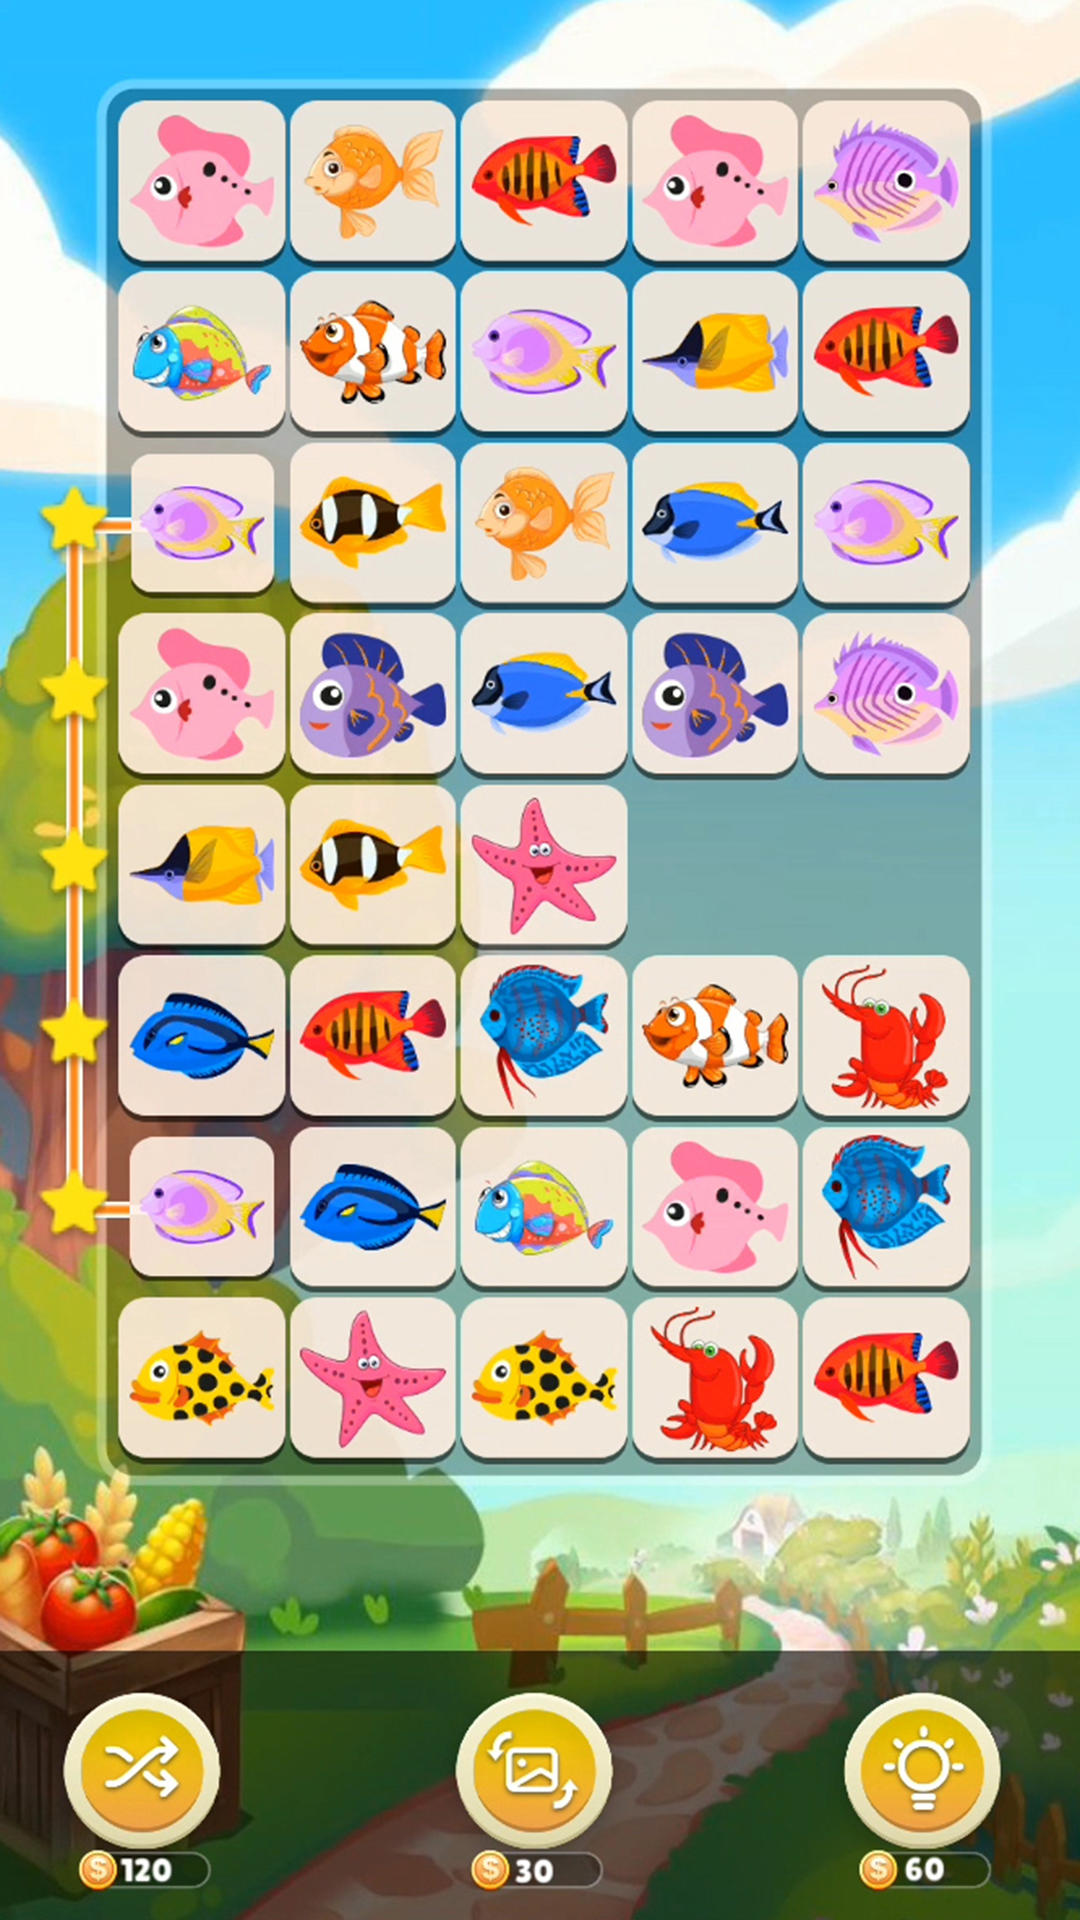 Onet Puzzle - Free Memory Tile Match Connect Game APK para Android